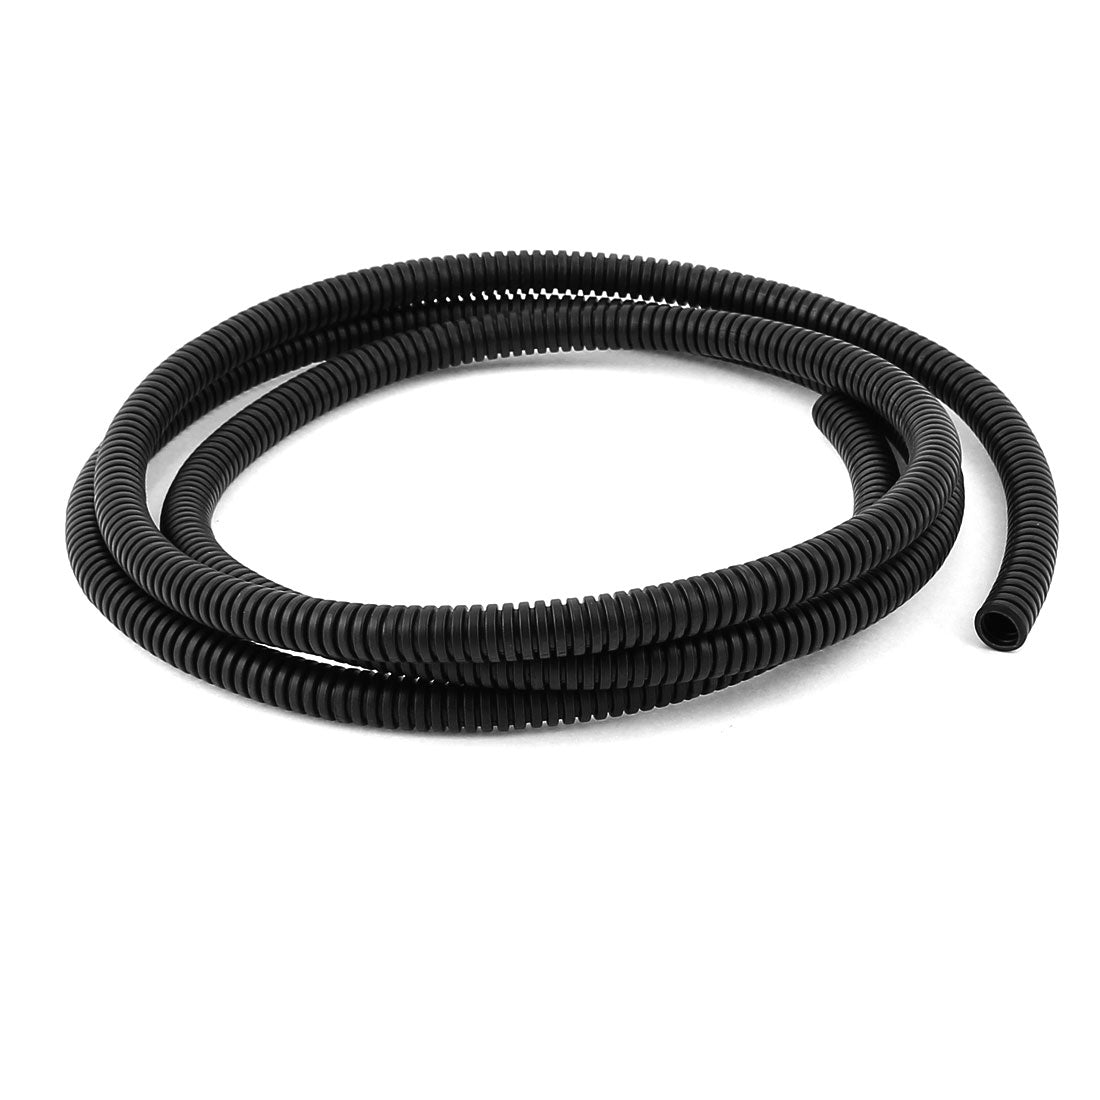 uxcell Uxcell 1.6 M 7 x 10 mm Plastic Flexible Corrugated Conduit Tube for Garden,Office Black